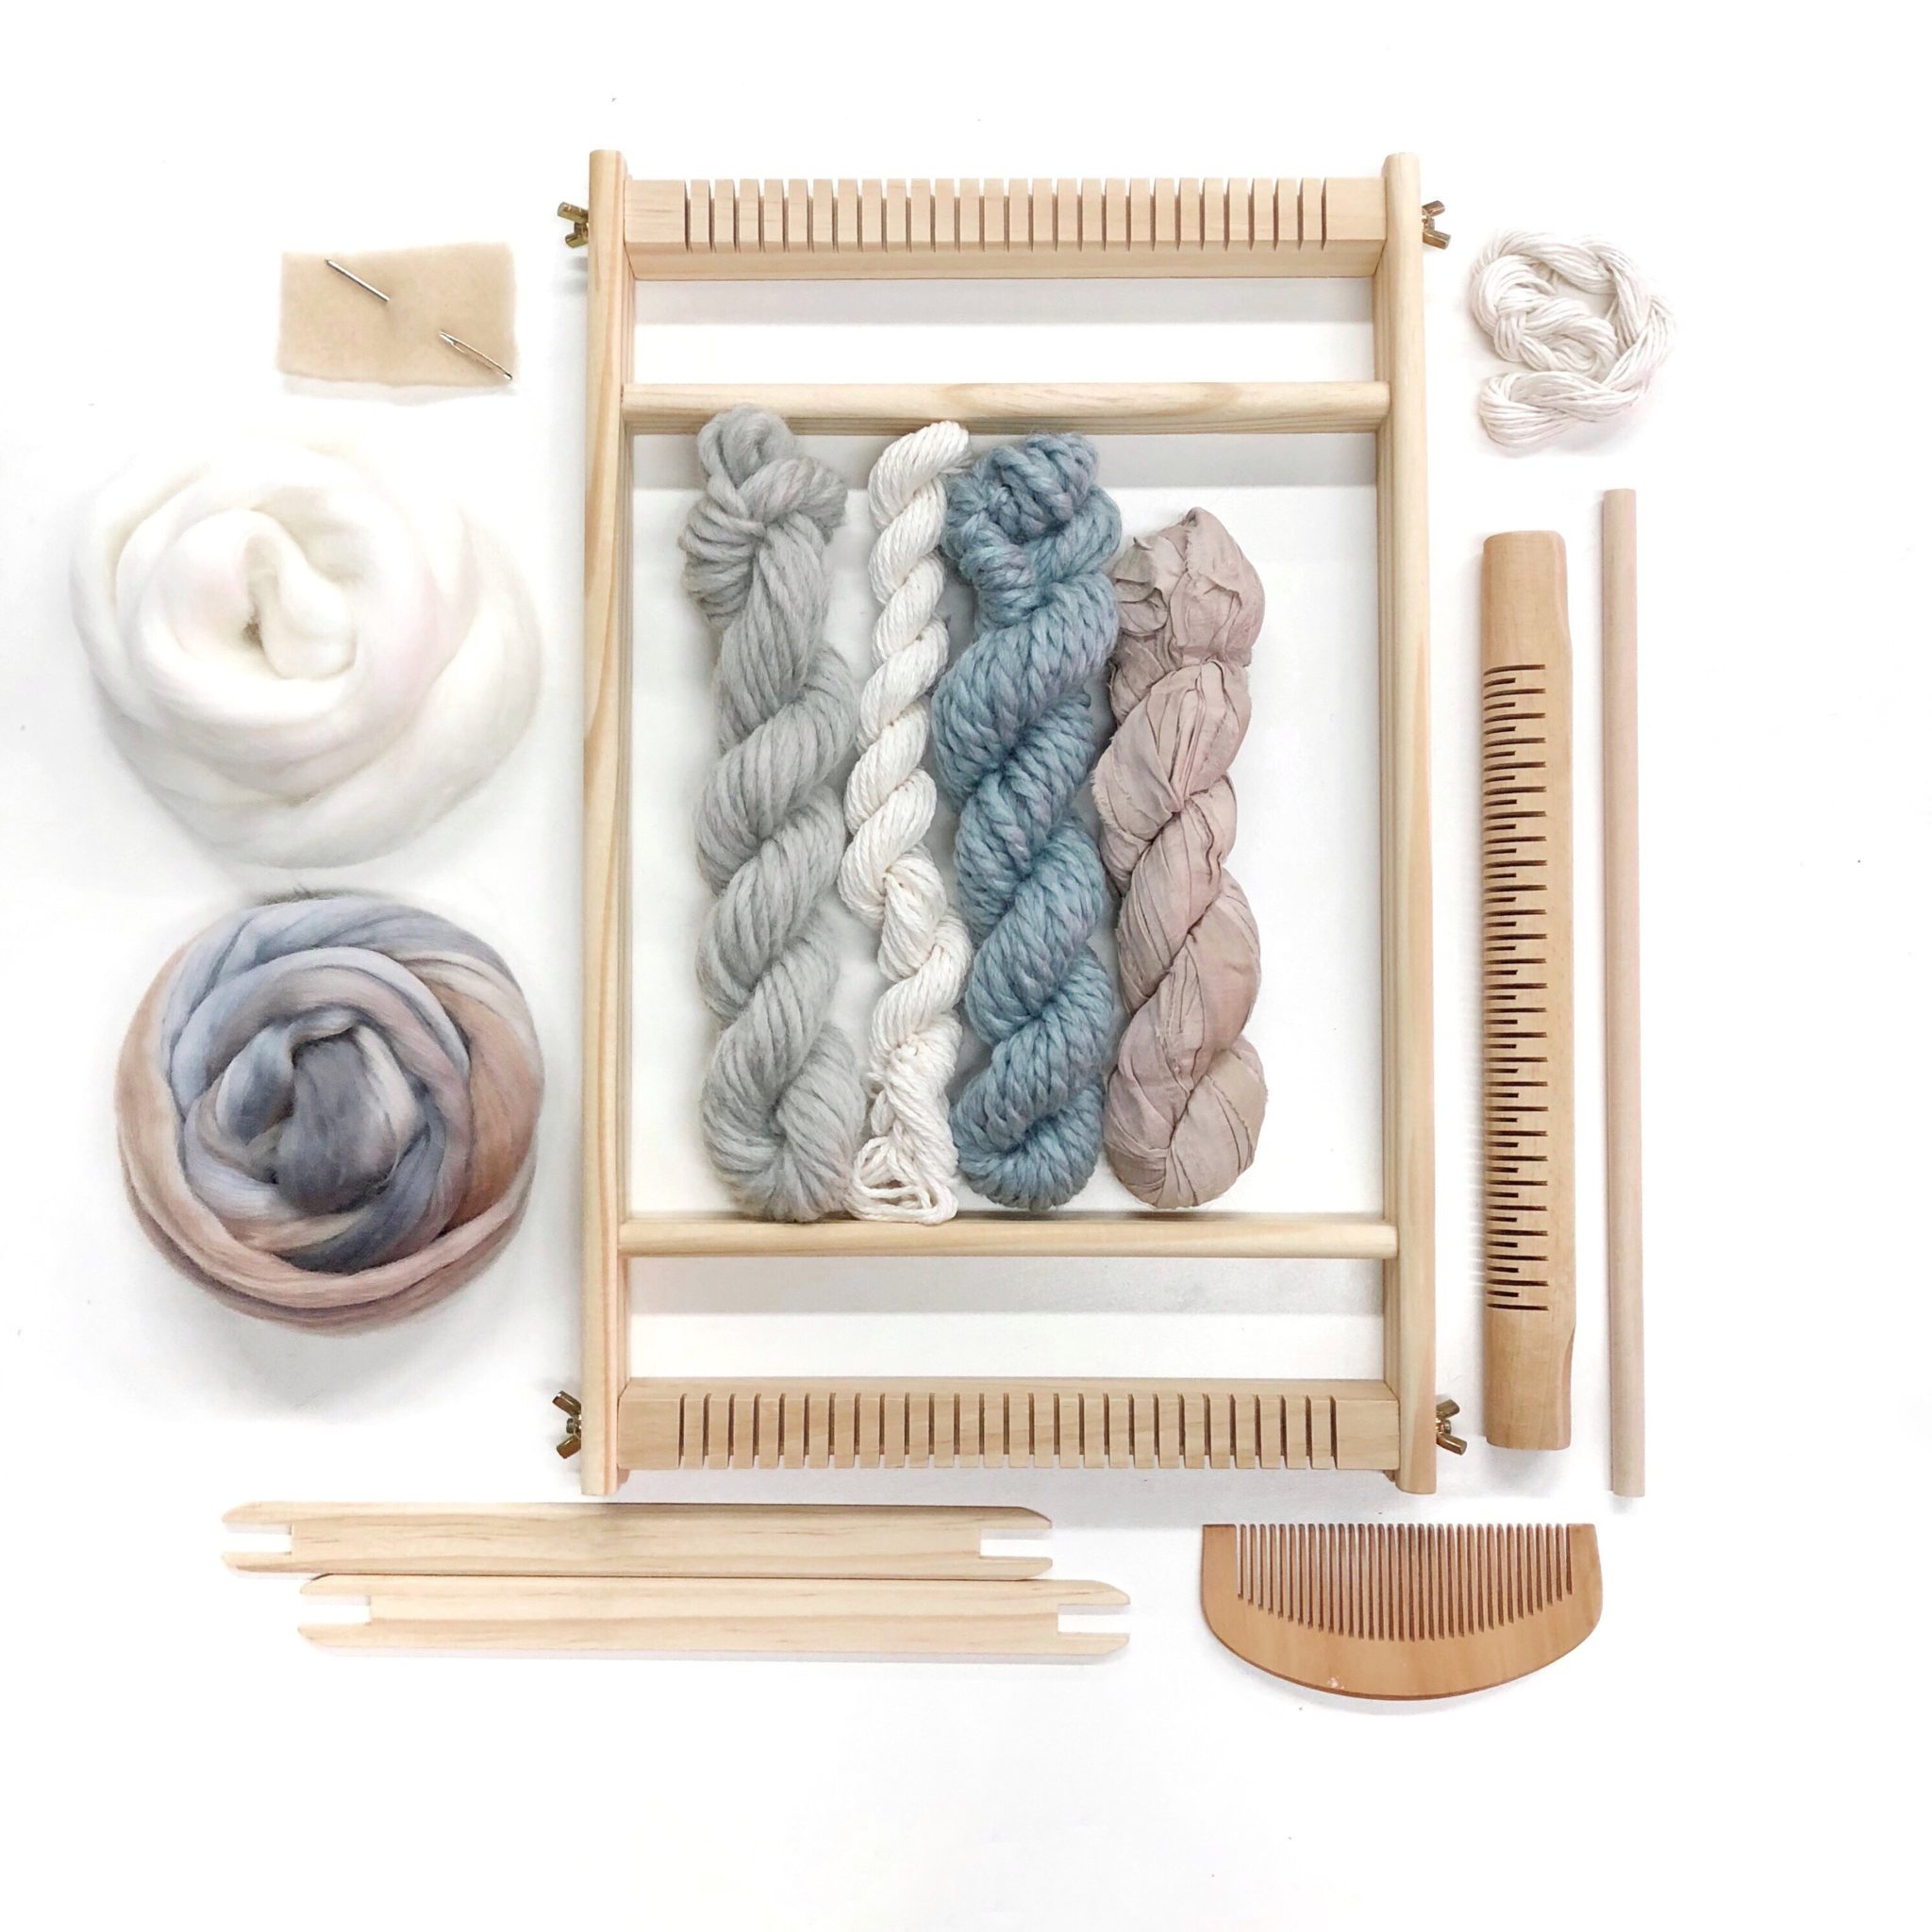 one of the best gift baskets for crafters filled with all of the supplies for beginning weavers